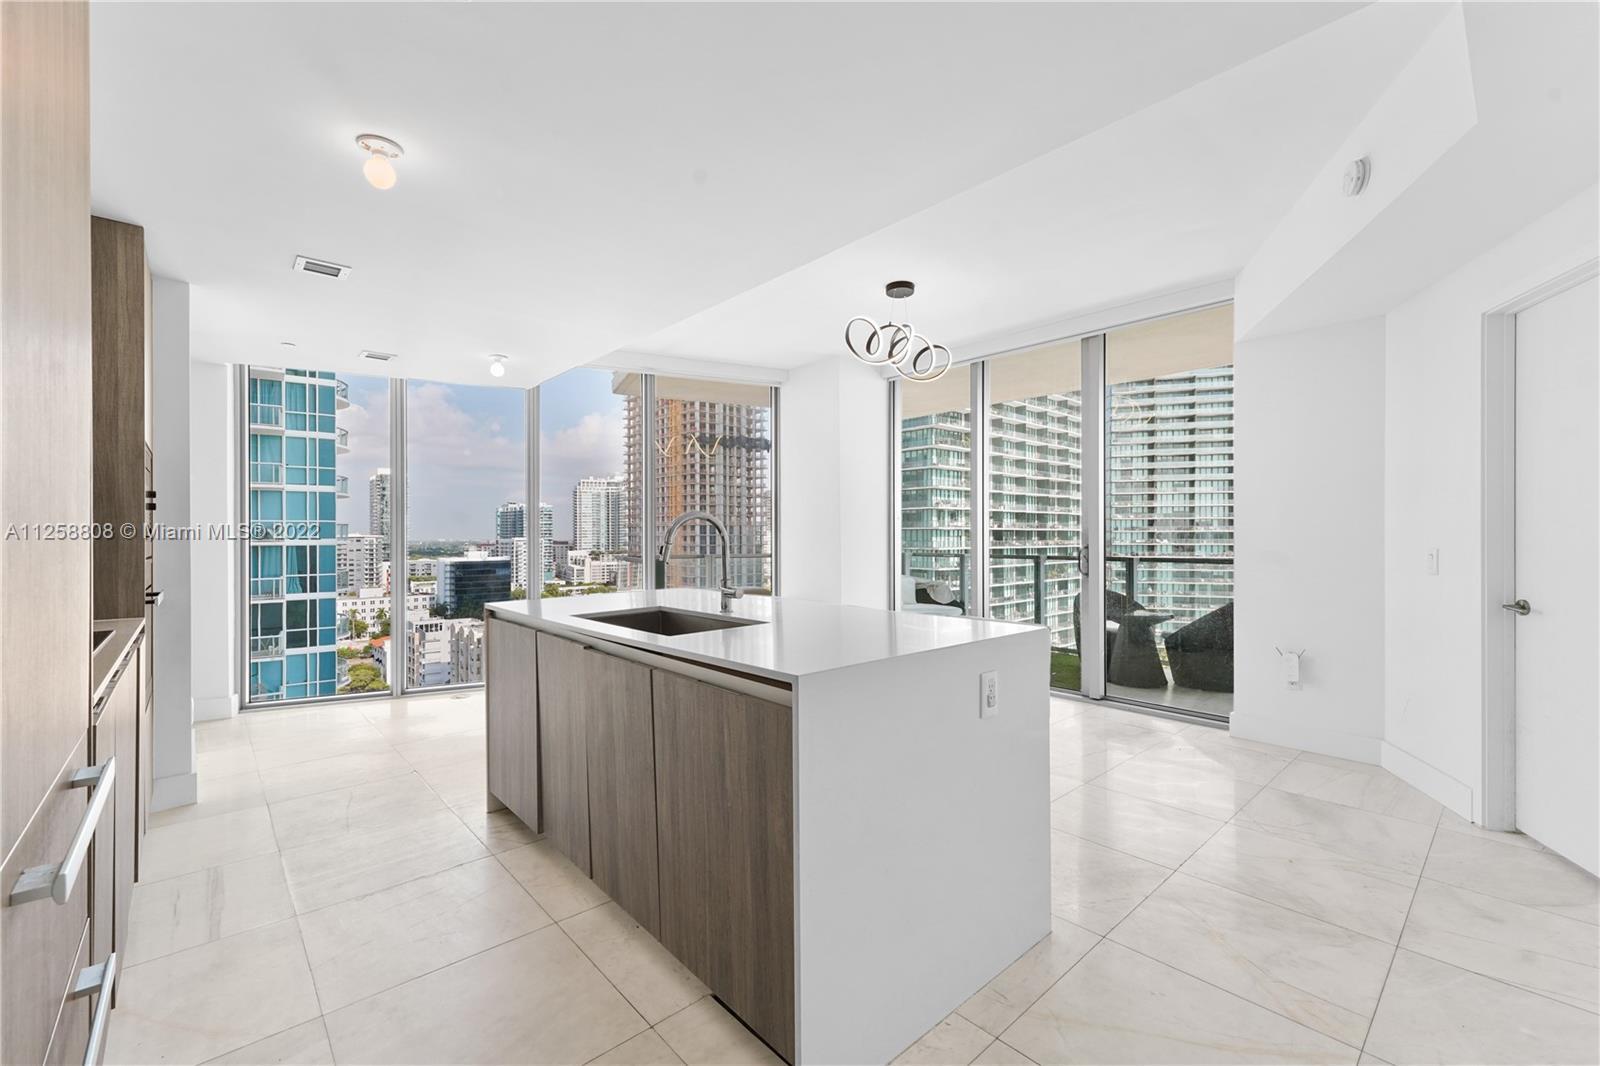 Great view fully upgraded 2 Beds 2.5 Baths at high-demand Biscayne Beach. Top-of-the-line finishes. 